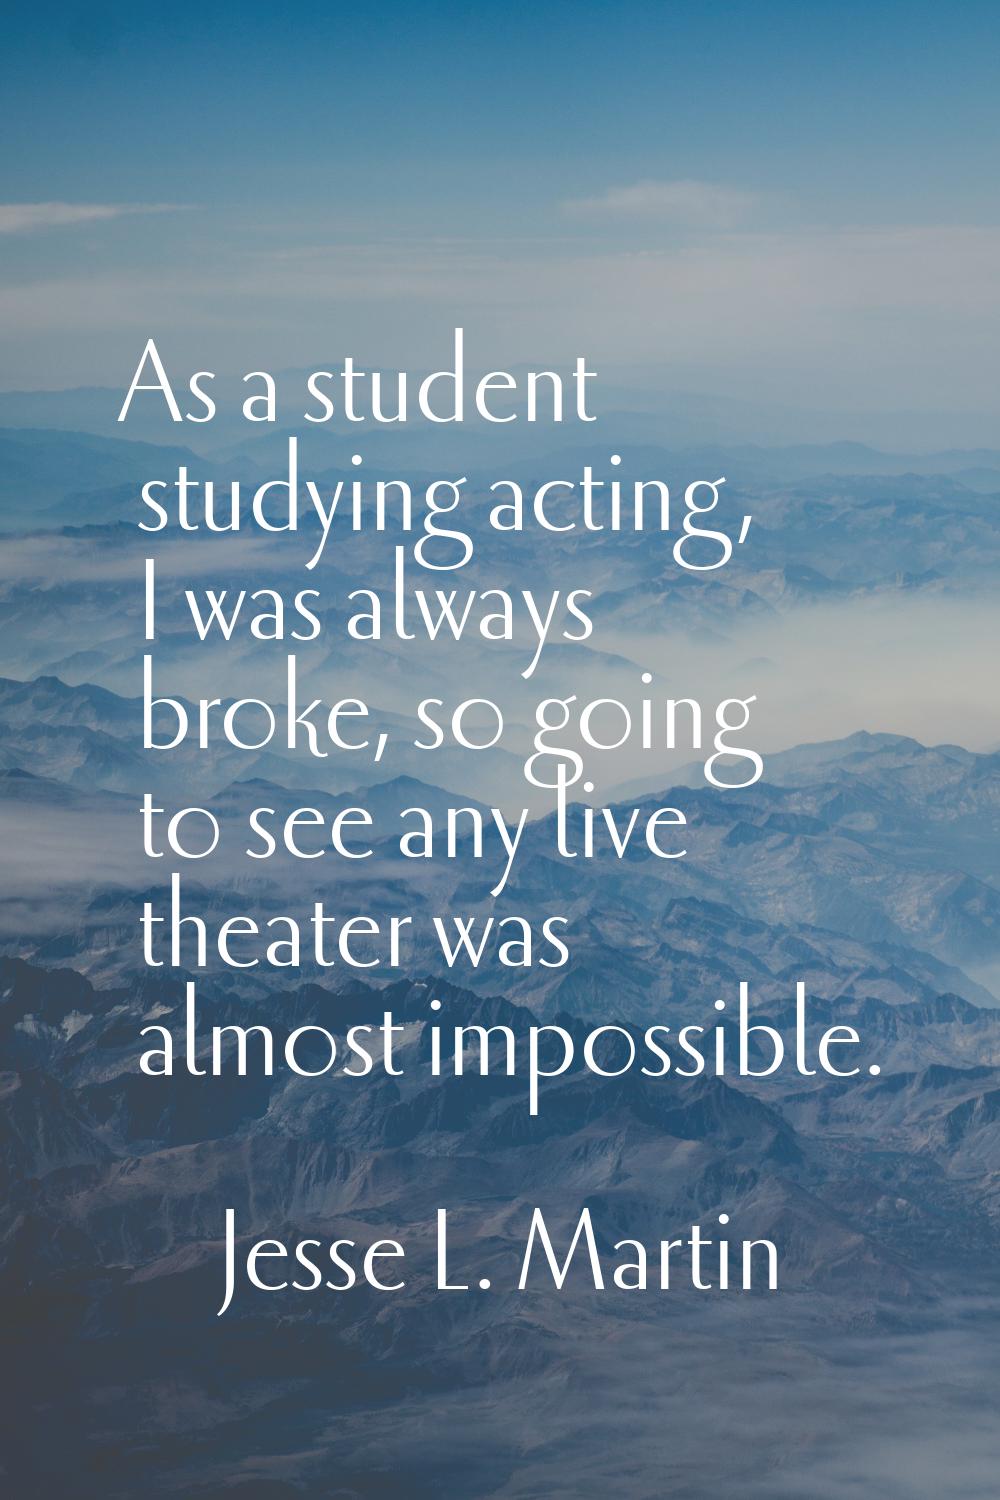 As a student studying acting, I was always broke, so going to see any live theater was almost impos